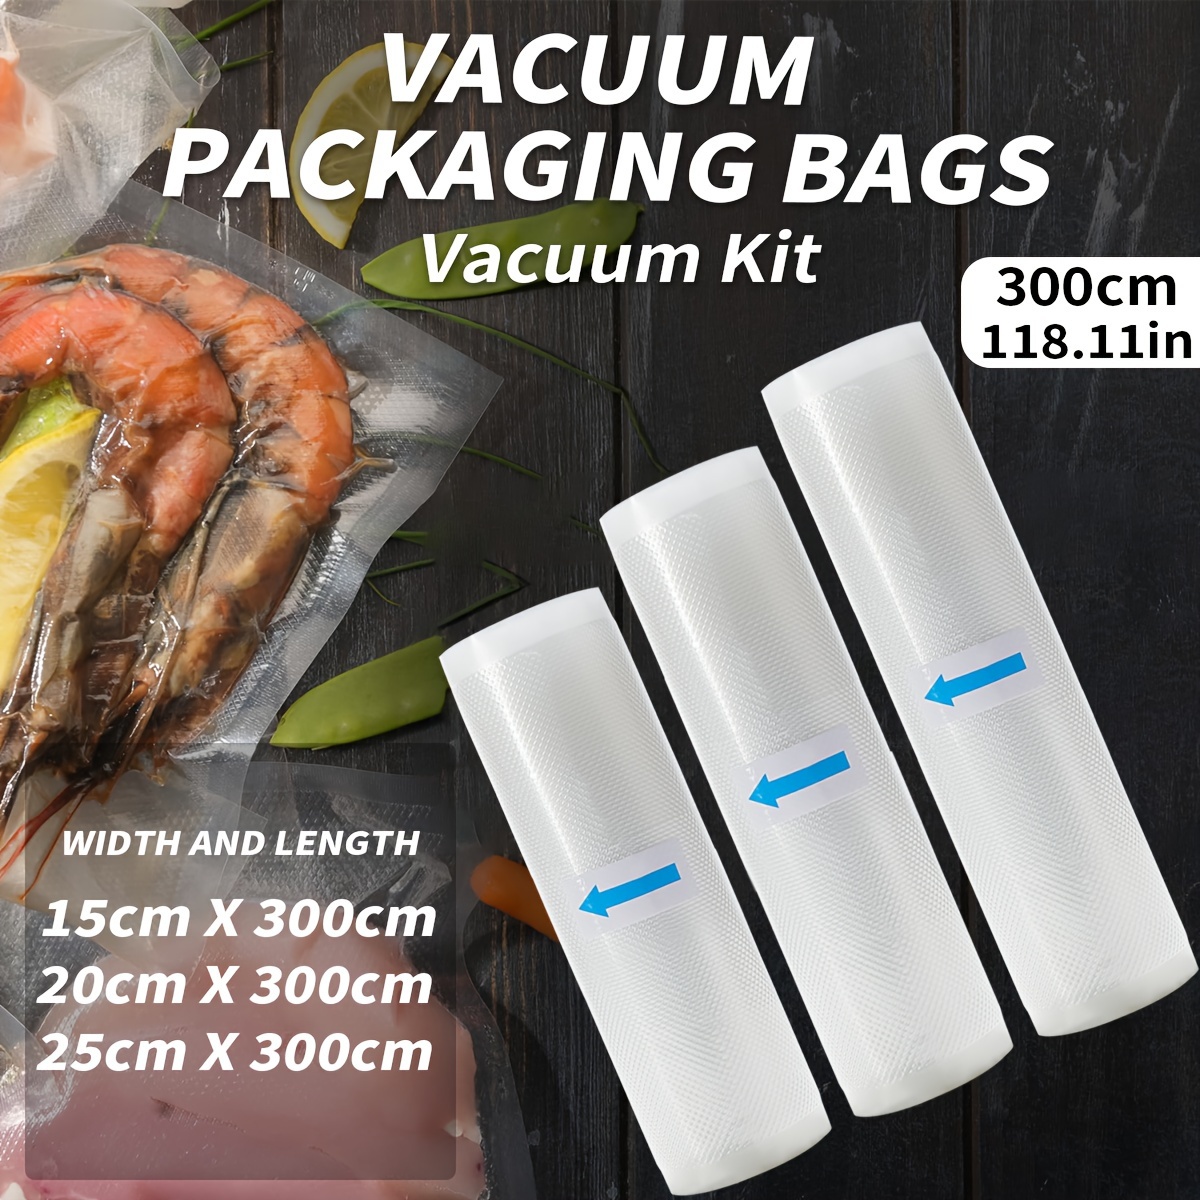 

3 Rolls Of Different Size Combinations Of Vacuum Sealed Bag, Free Of Bisphenol A, 7 Layer Co Extruded Diamond Patterned Vacuum Film Bags, Vacuum Preservation Bags, Patterned Film Food Packaging Bags